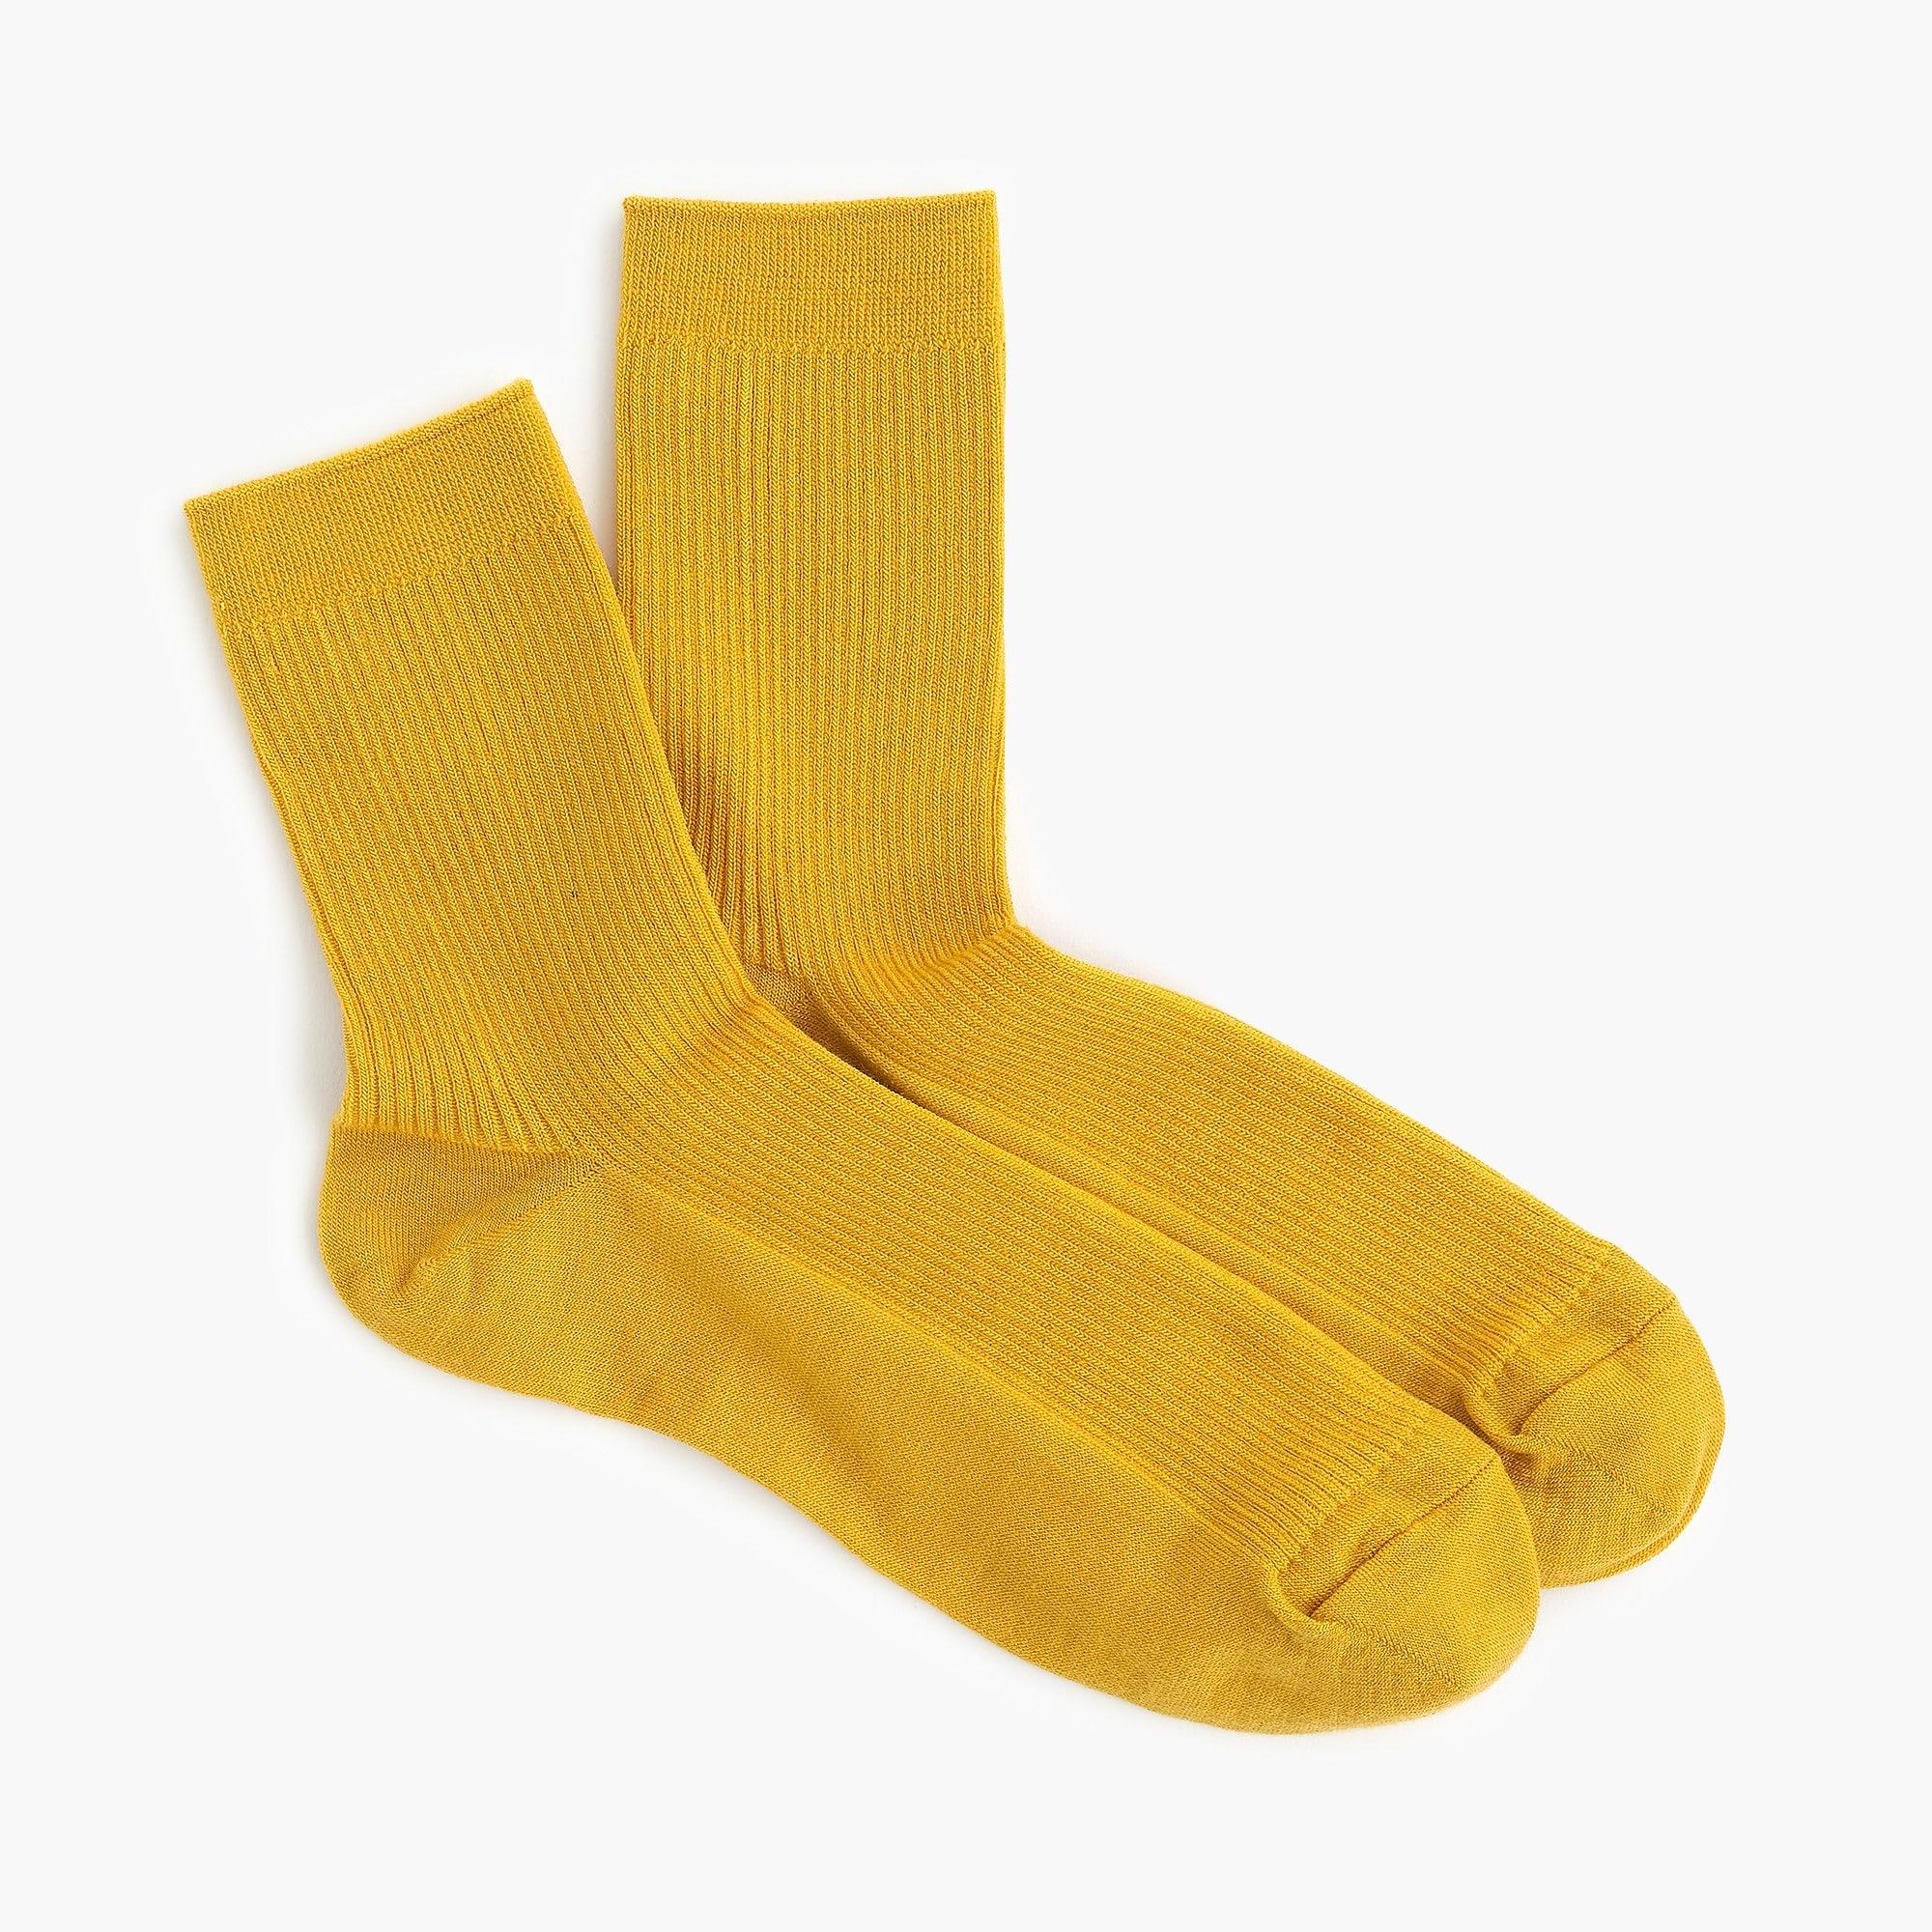 Lyst - J.Crew Ribbed Bootie Socks in Yellow